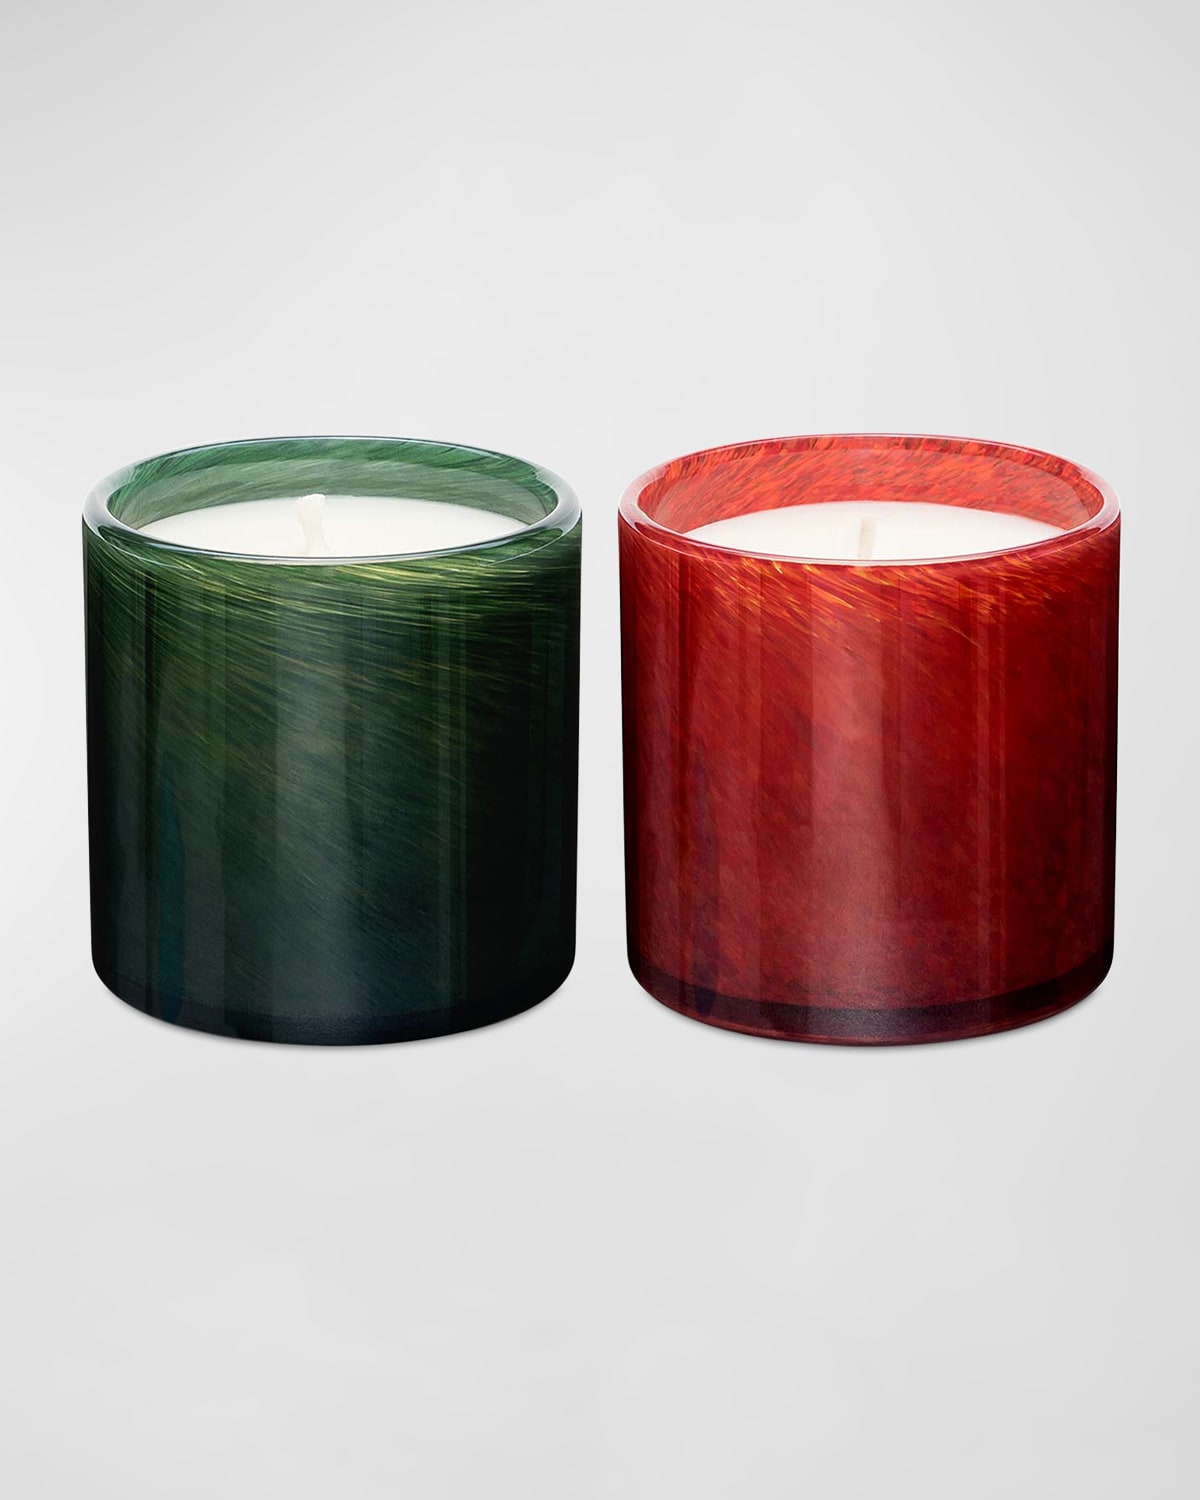 LAFCO New York Cinnamon Bark and Woodland Spruce Le Candle Duo, 6.5oz. each